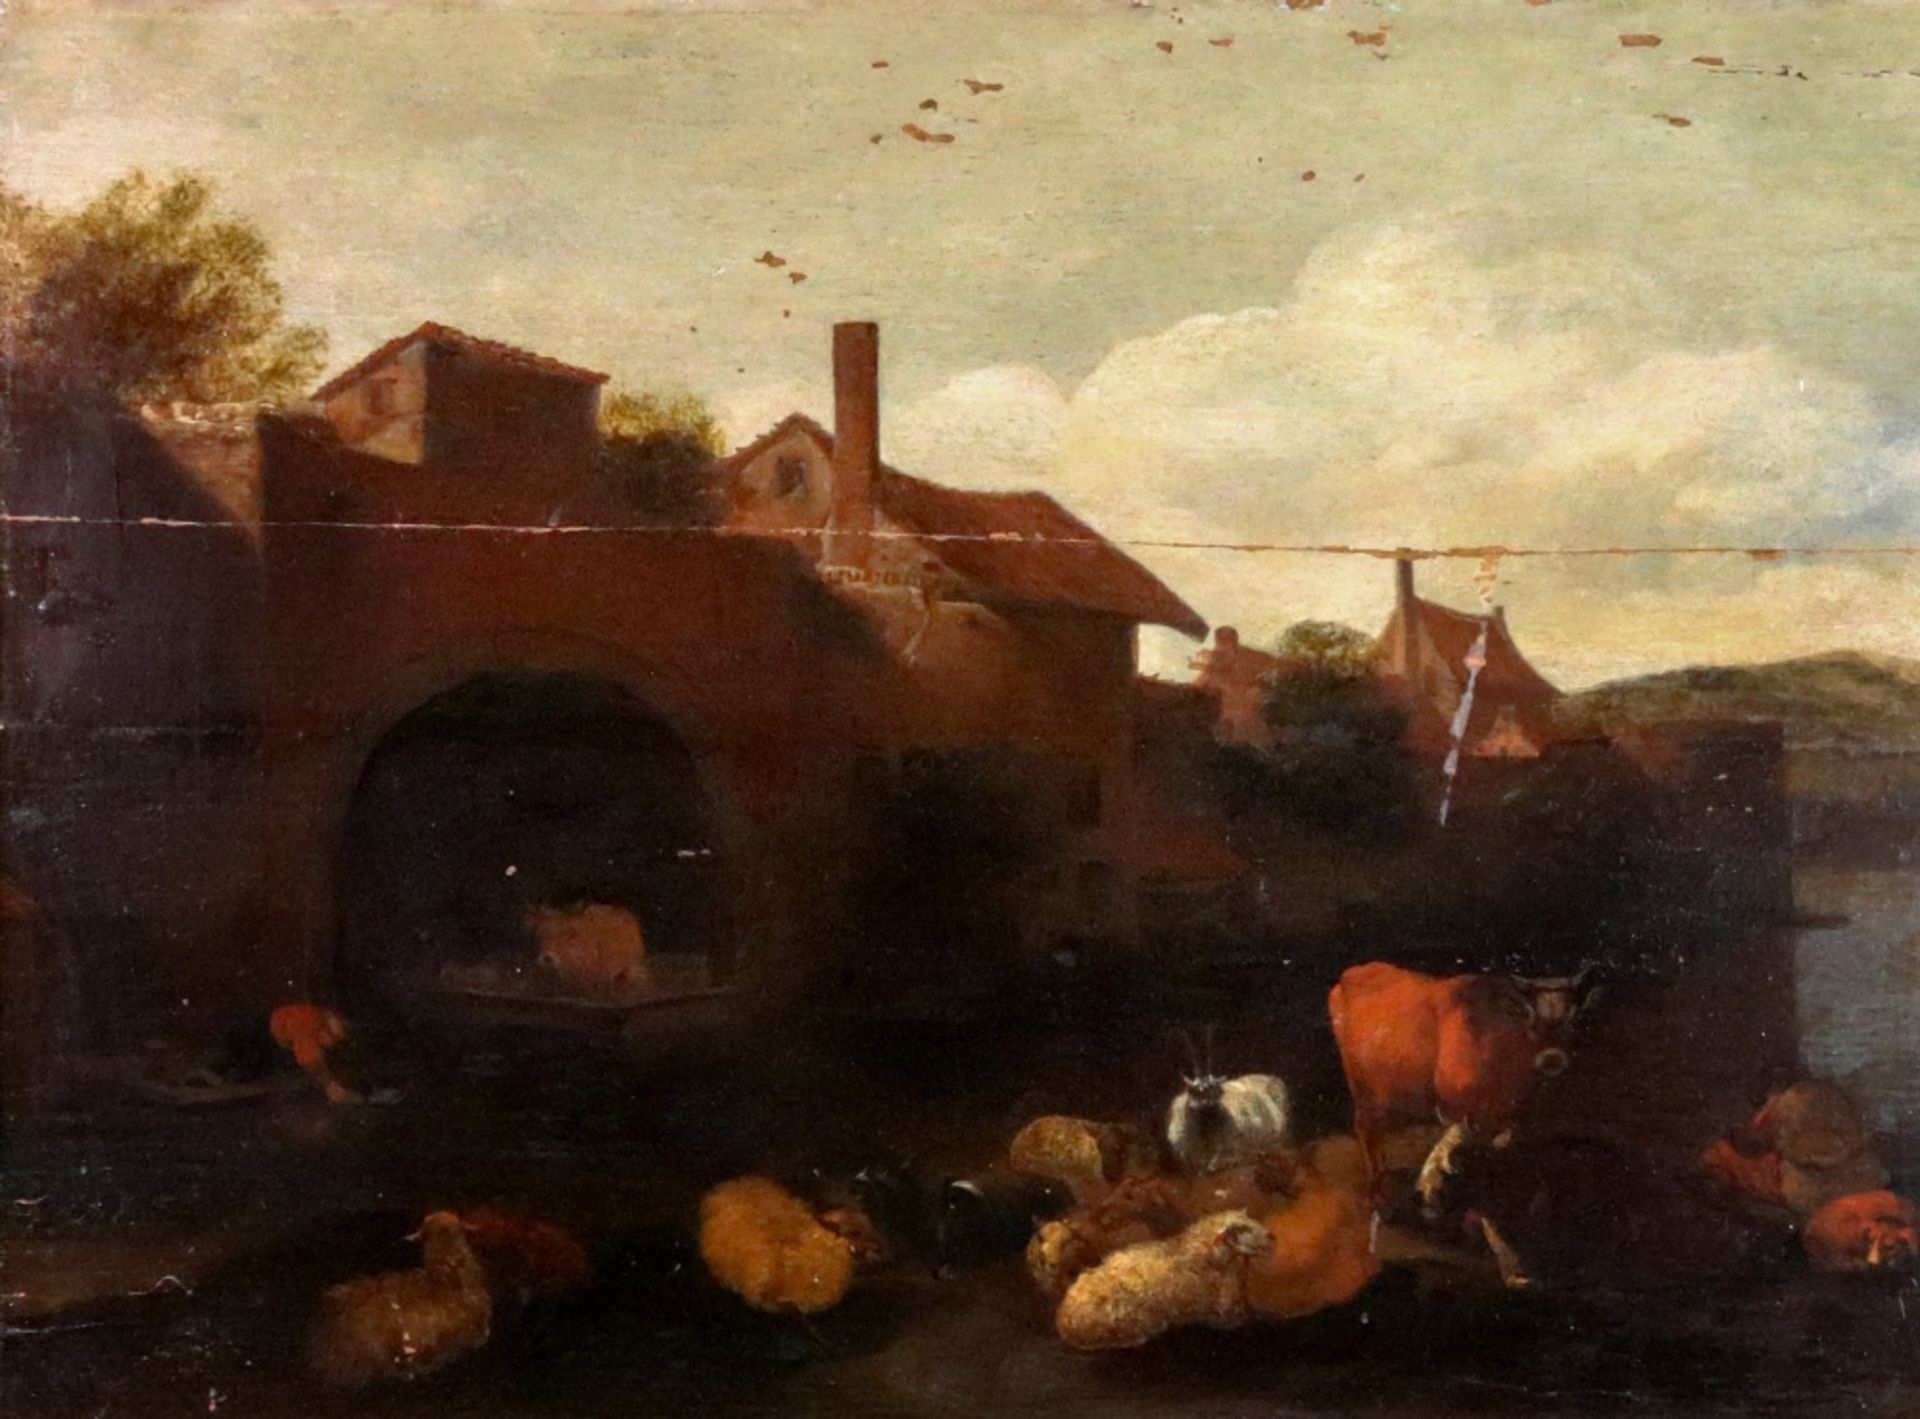 European School, 18th century, Sheep and cattle by a river and buildings, oil on panel, 49 x 66cm.